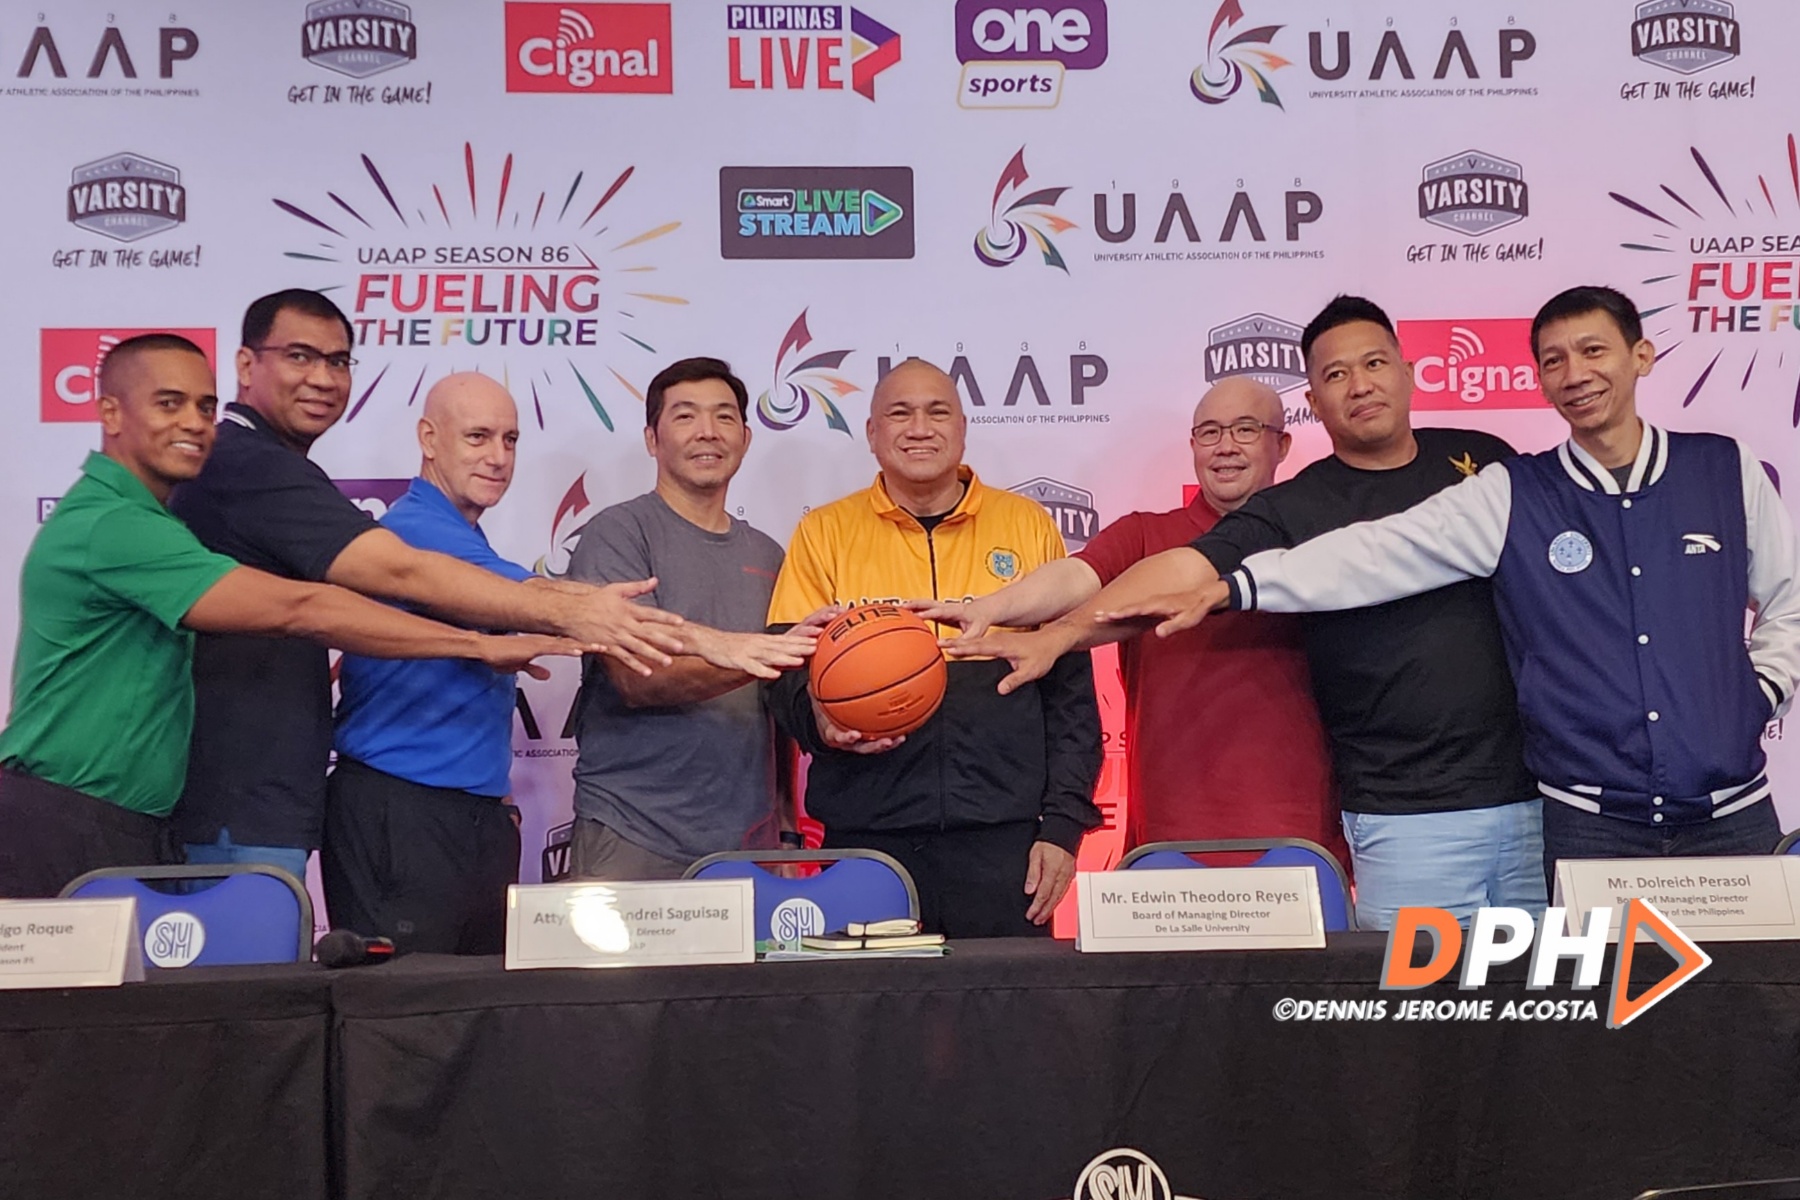 Pilipinas Live to air UAAP games